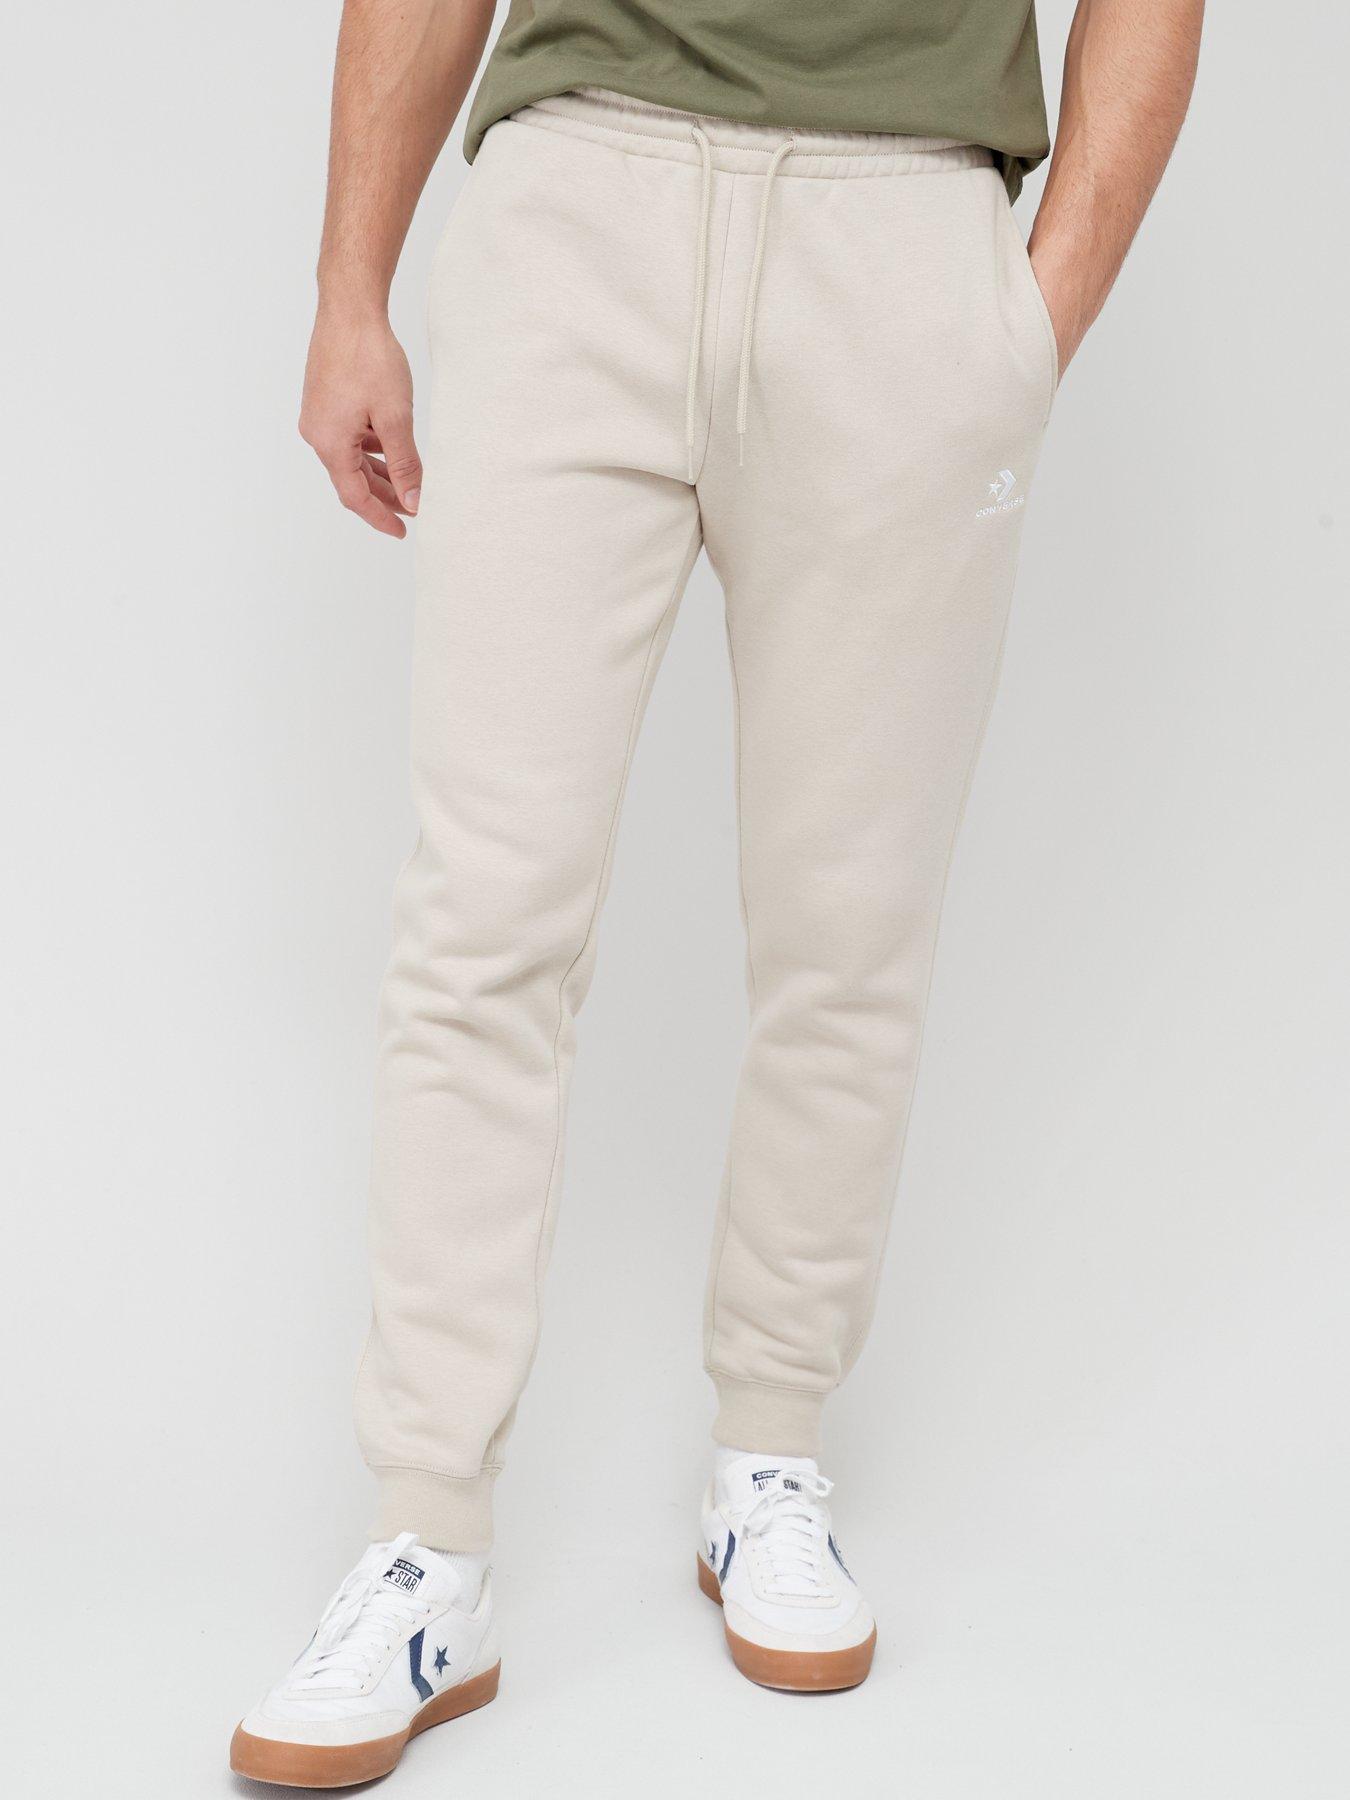 Converse Jogging bottoms | Mens | Sports & | www.very.co.uk